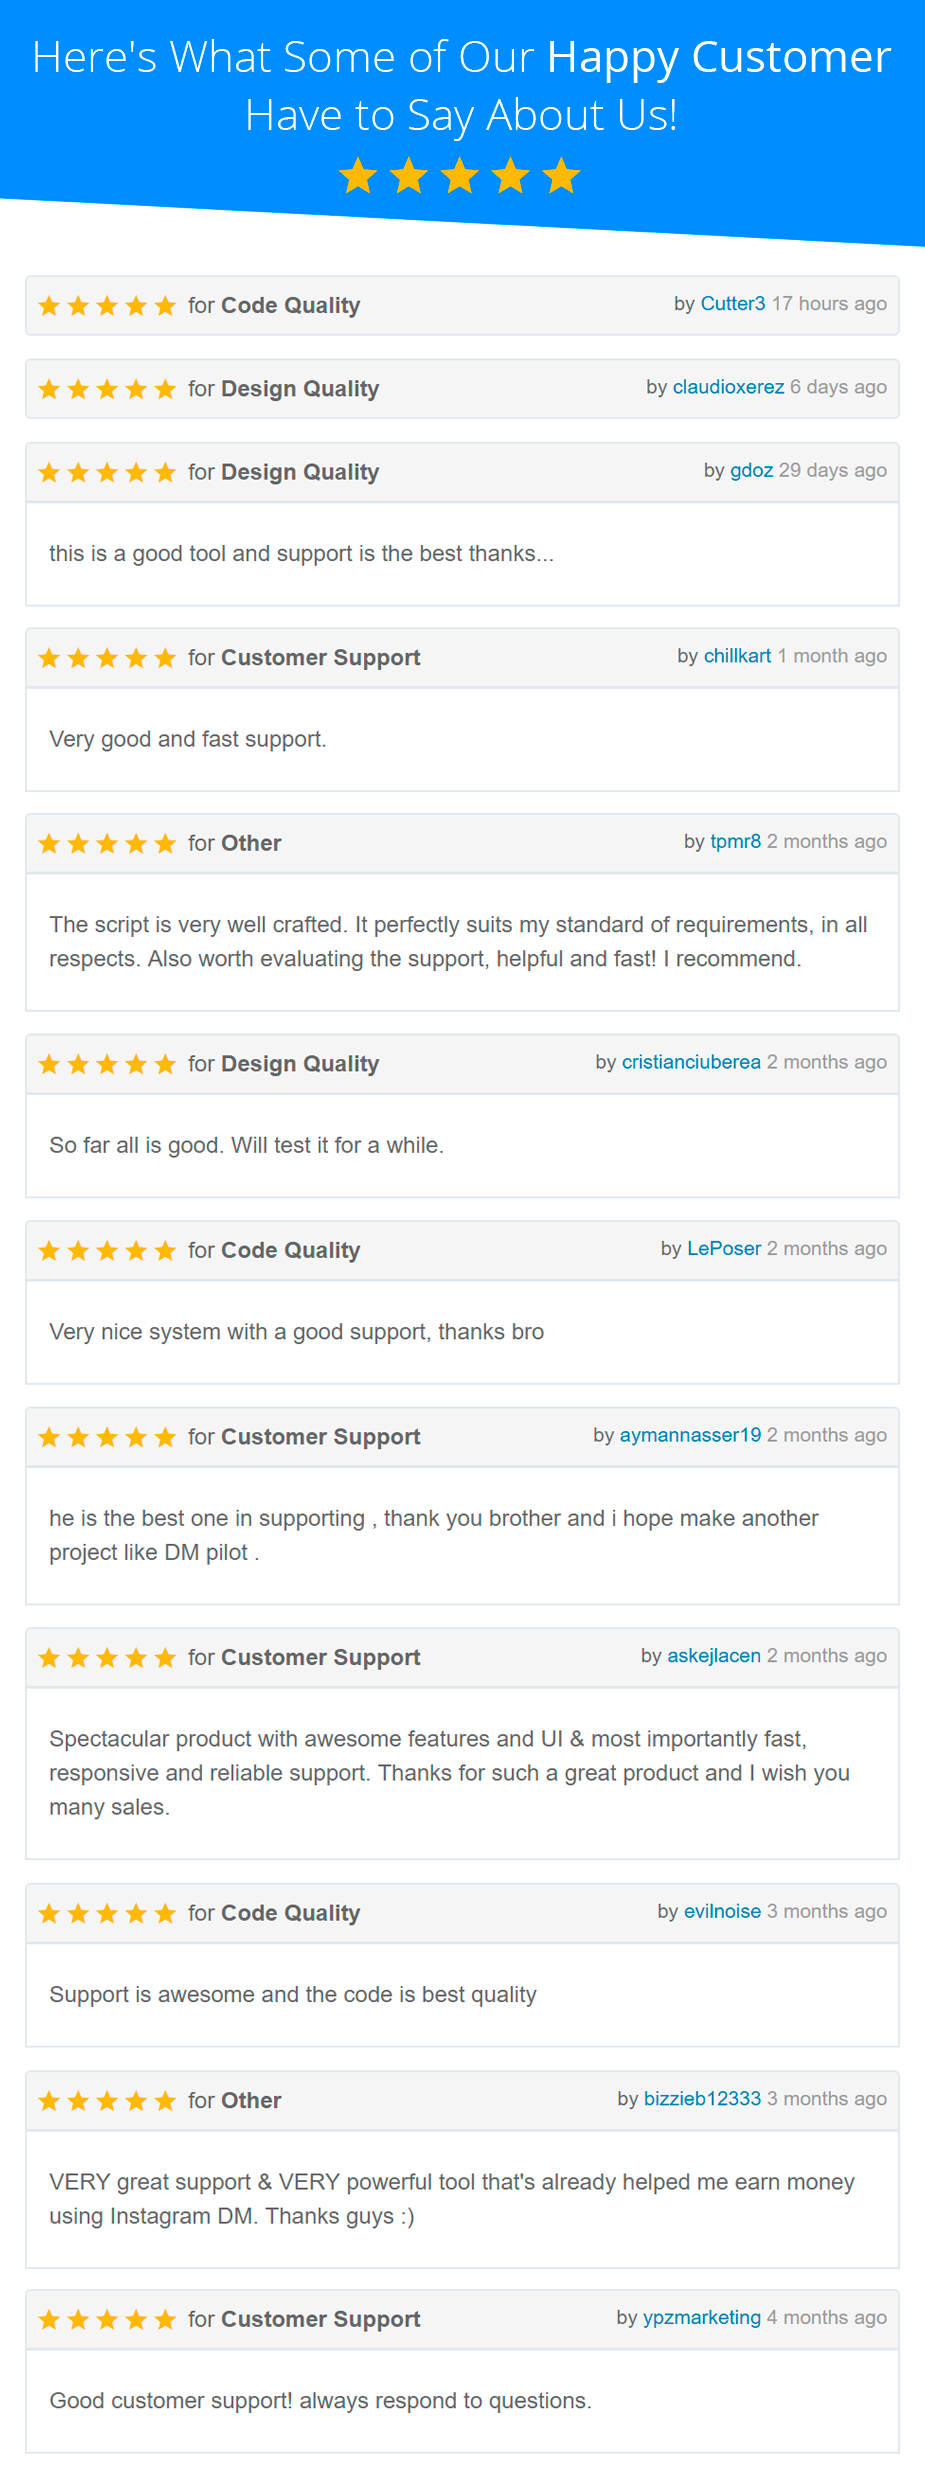 Here's What Some of Our Happy Customer Have to Say About Us!